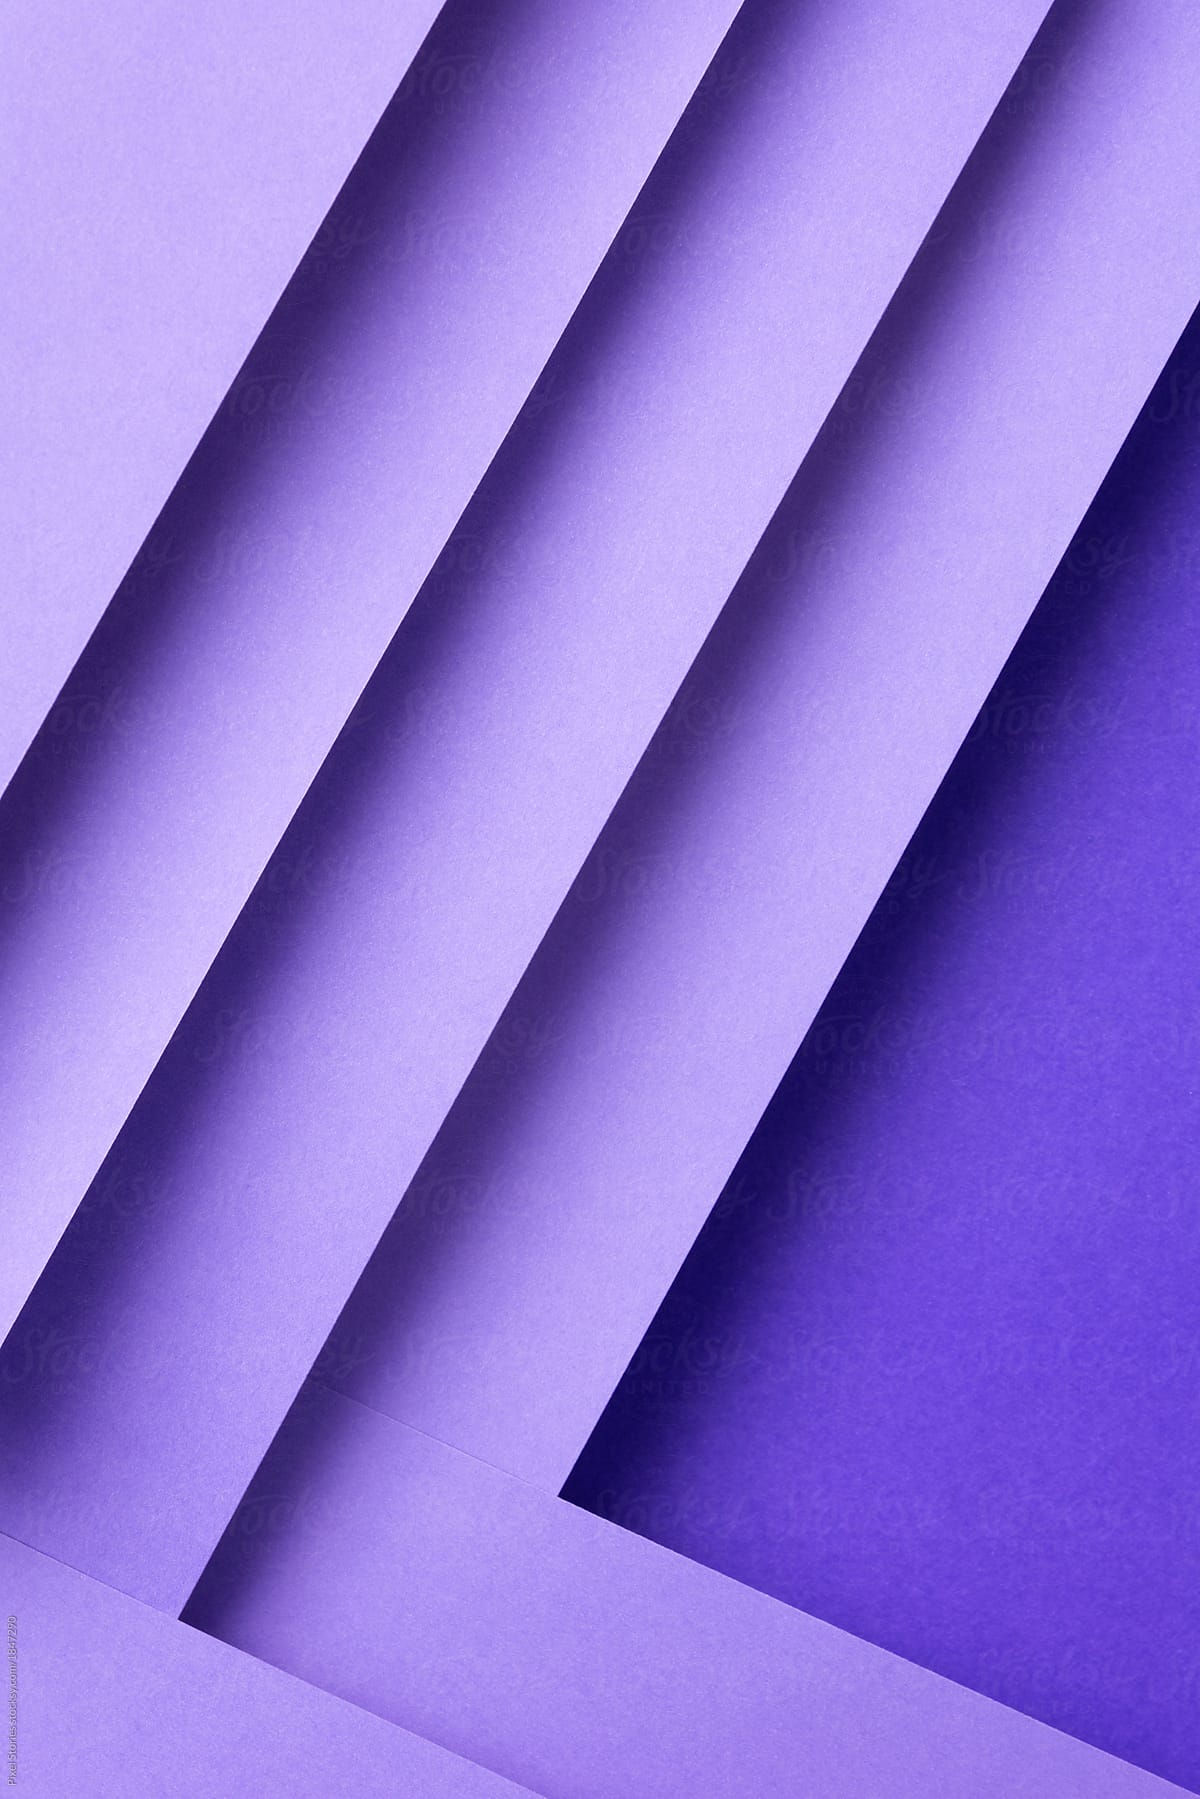 Ultra violet abstract paper design background